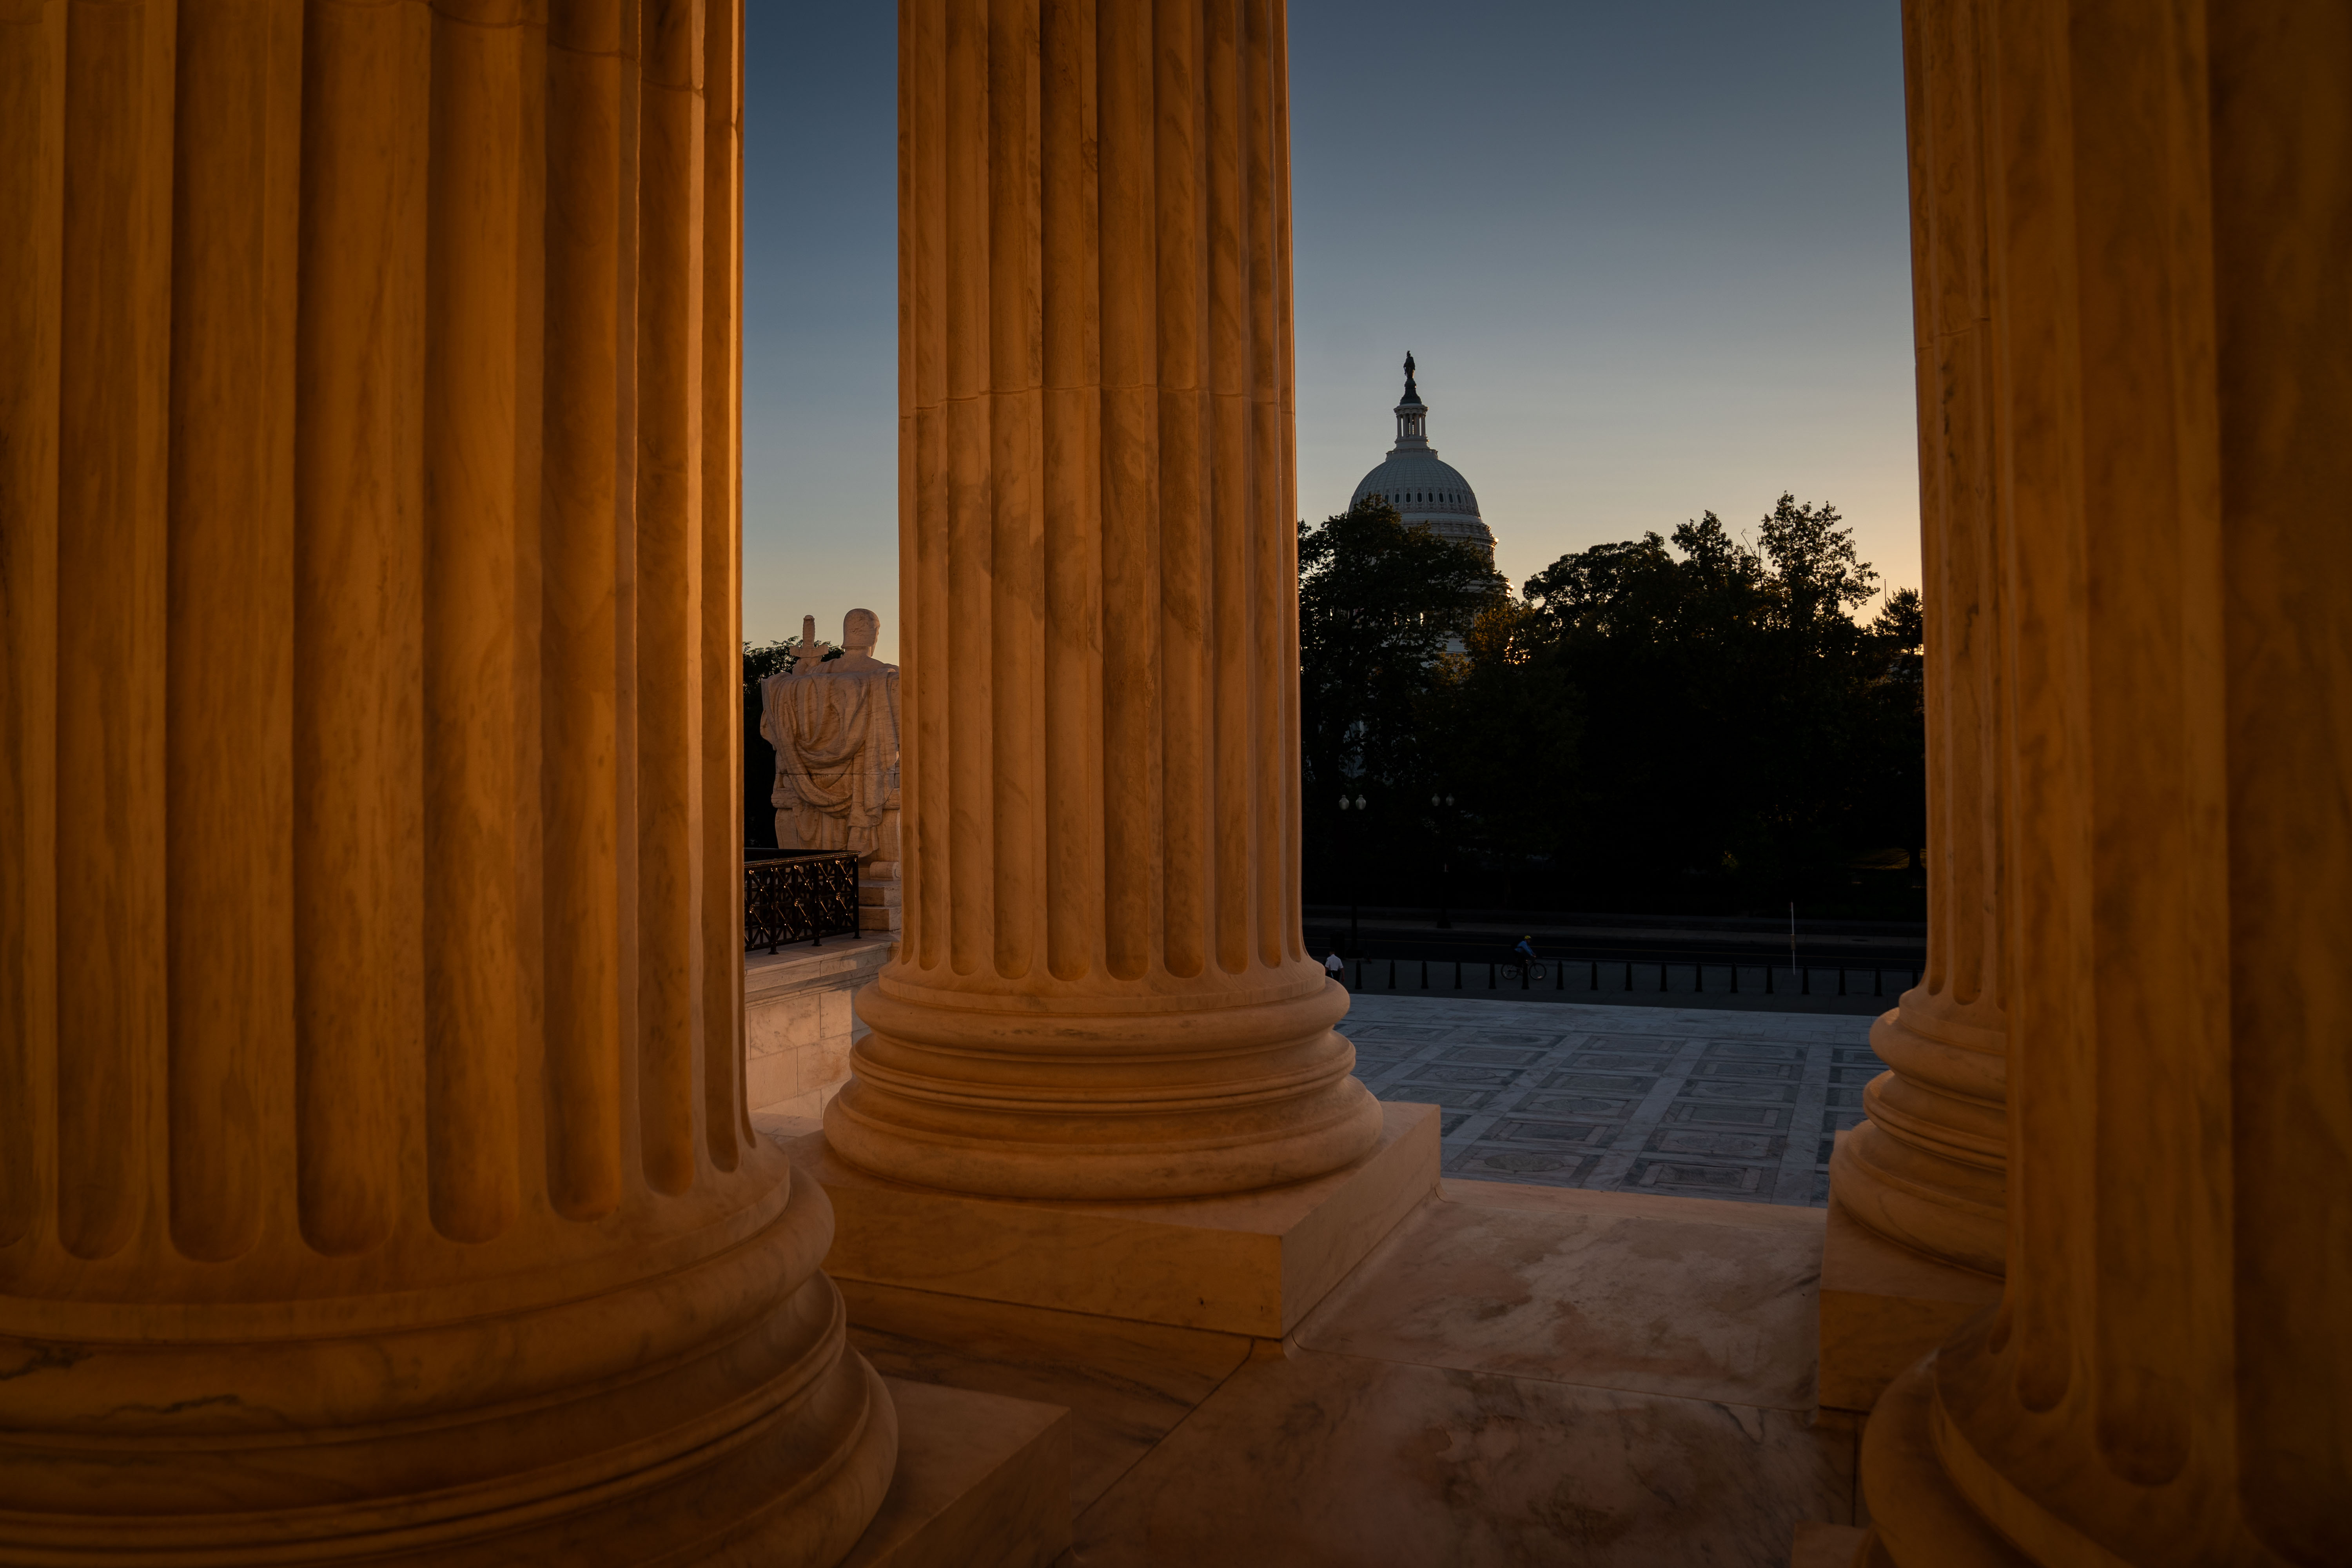 View of the U.S. Capitol from the Supreme Court.